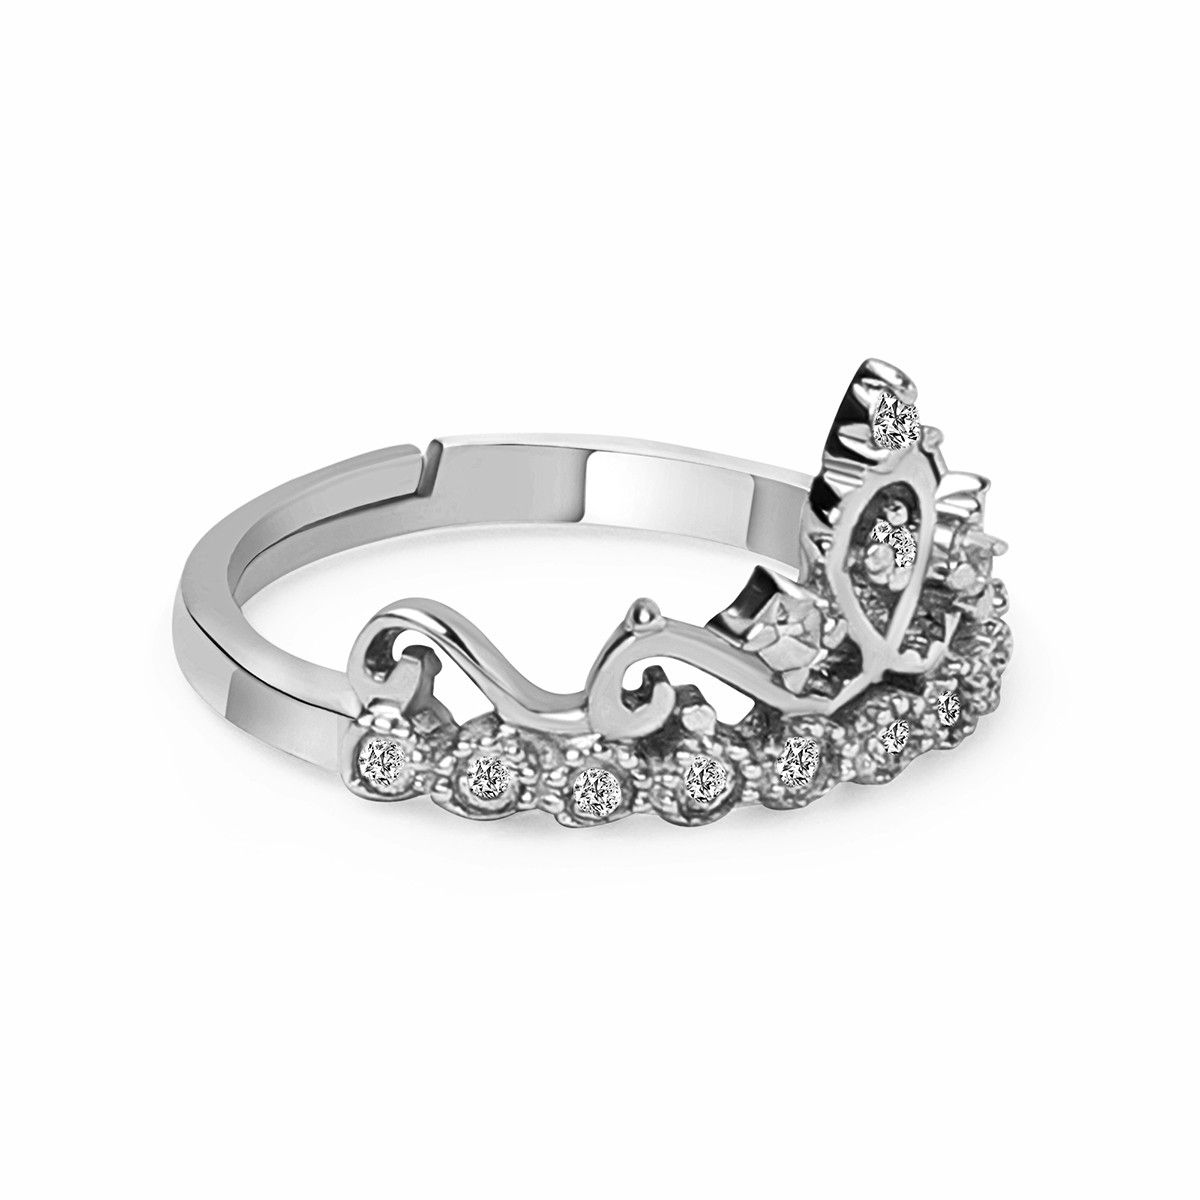 New designer beautiful silver rings with 79% discount on instant order  extra discount on website order for order visit our website link in… |  Instagram